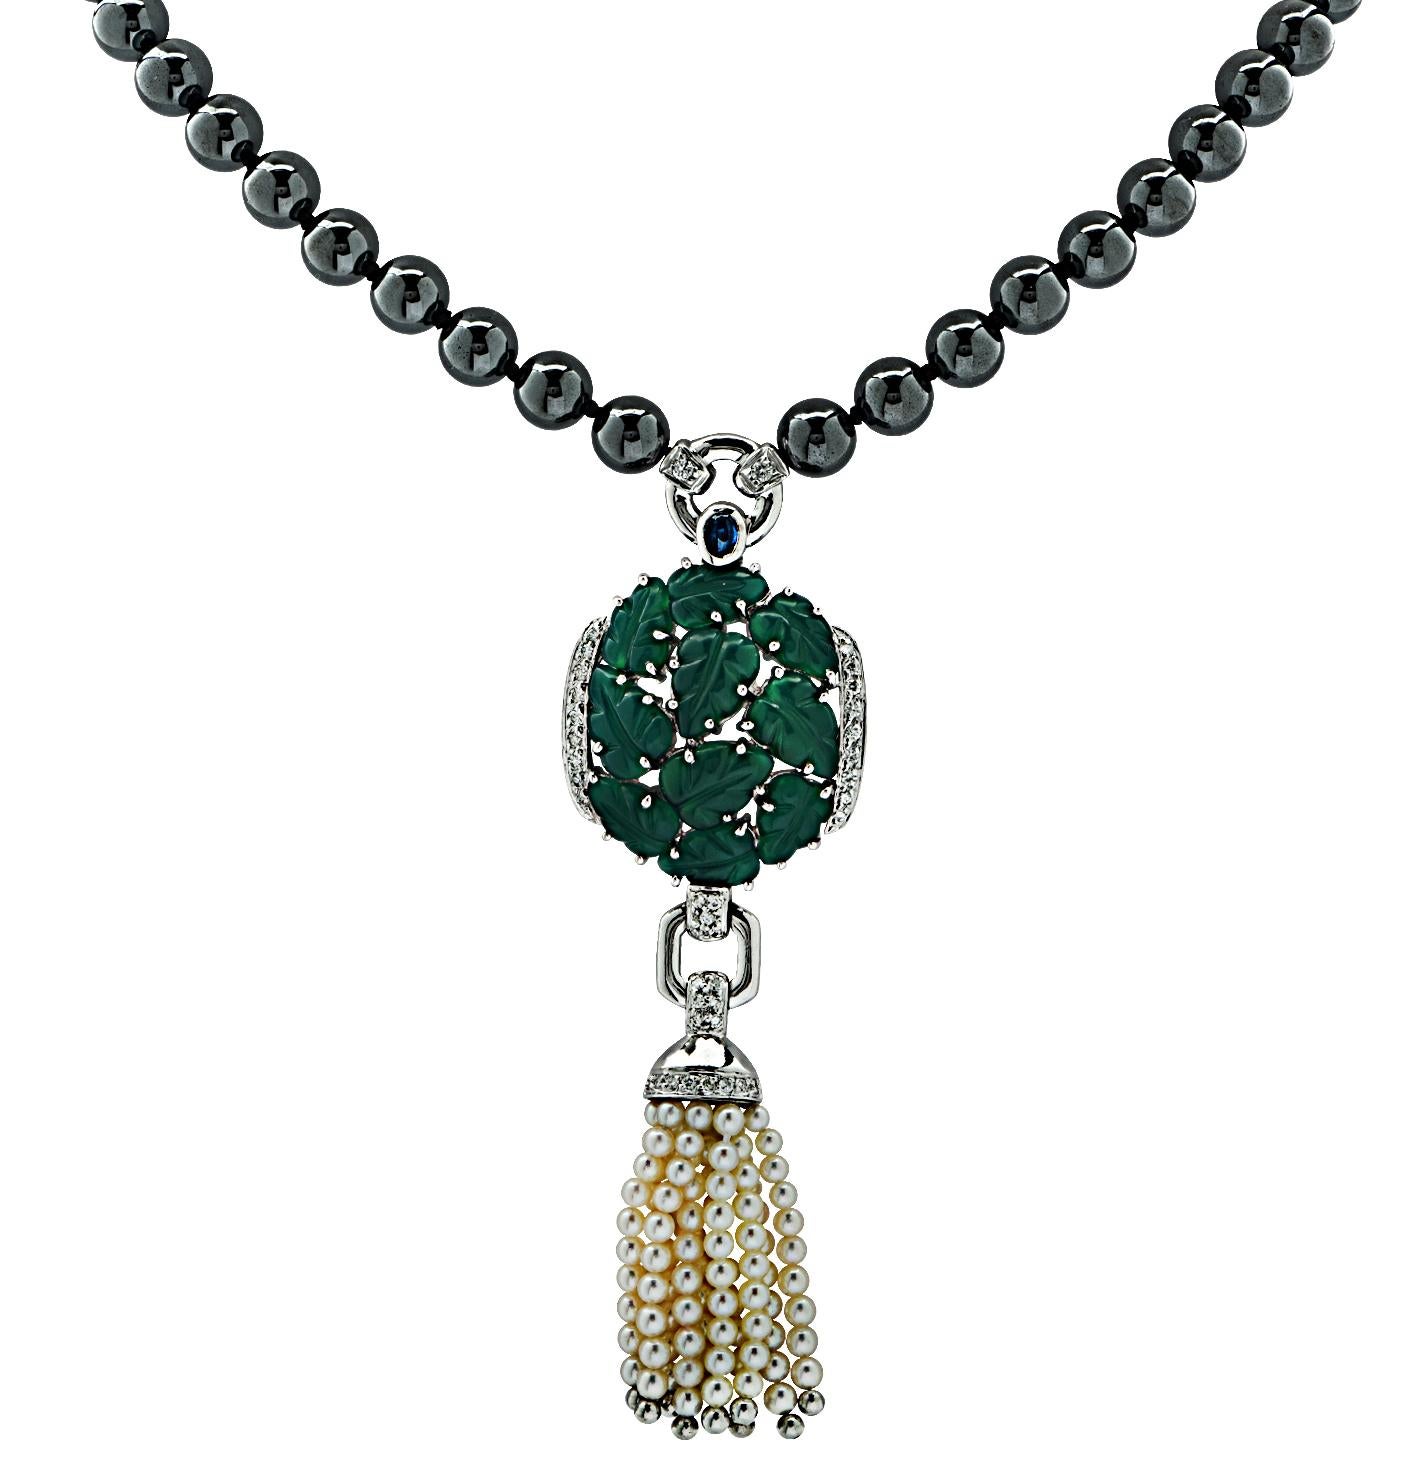 From the House of Cartier,  this stunning sautoir necklace showcases Cartier timeless style. Reminiscent of the art deco era, this sensational necklace features a tassel with 10 delicately carved chrysoprase leaf motifs framed with 33 round